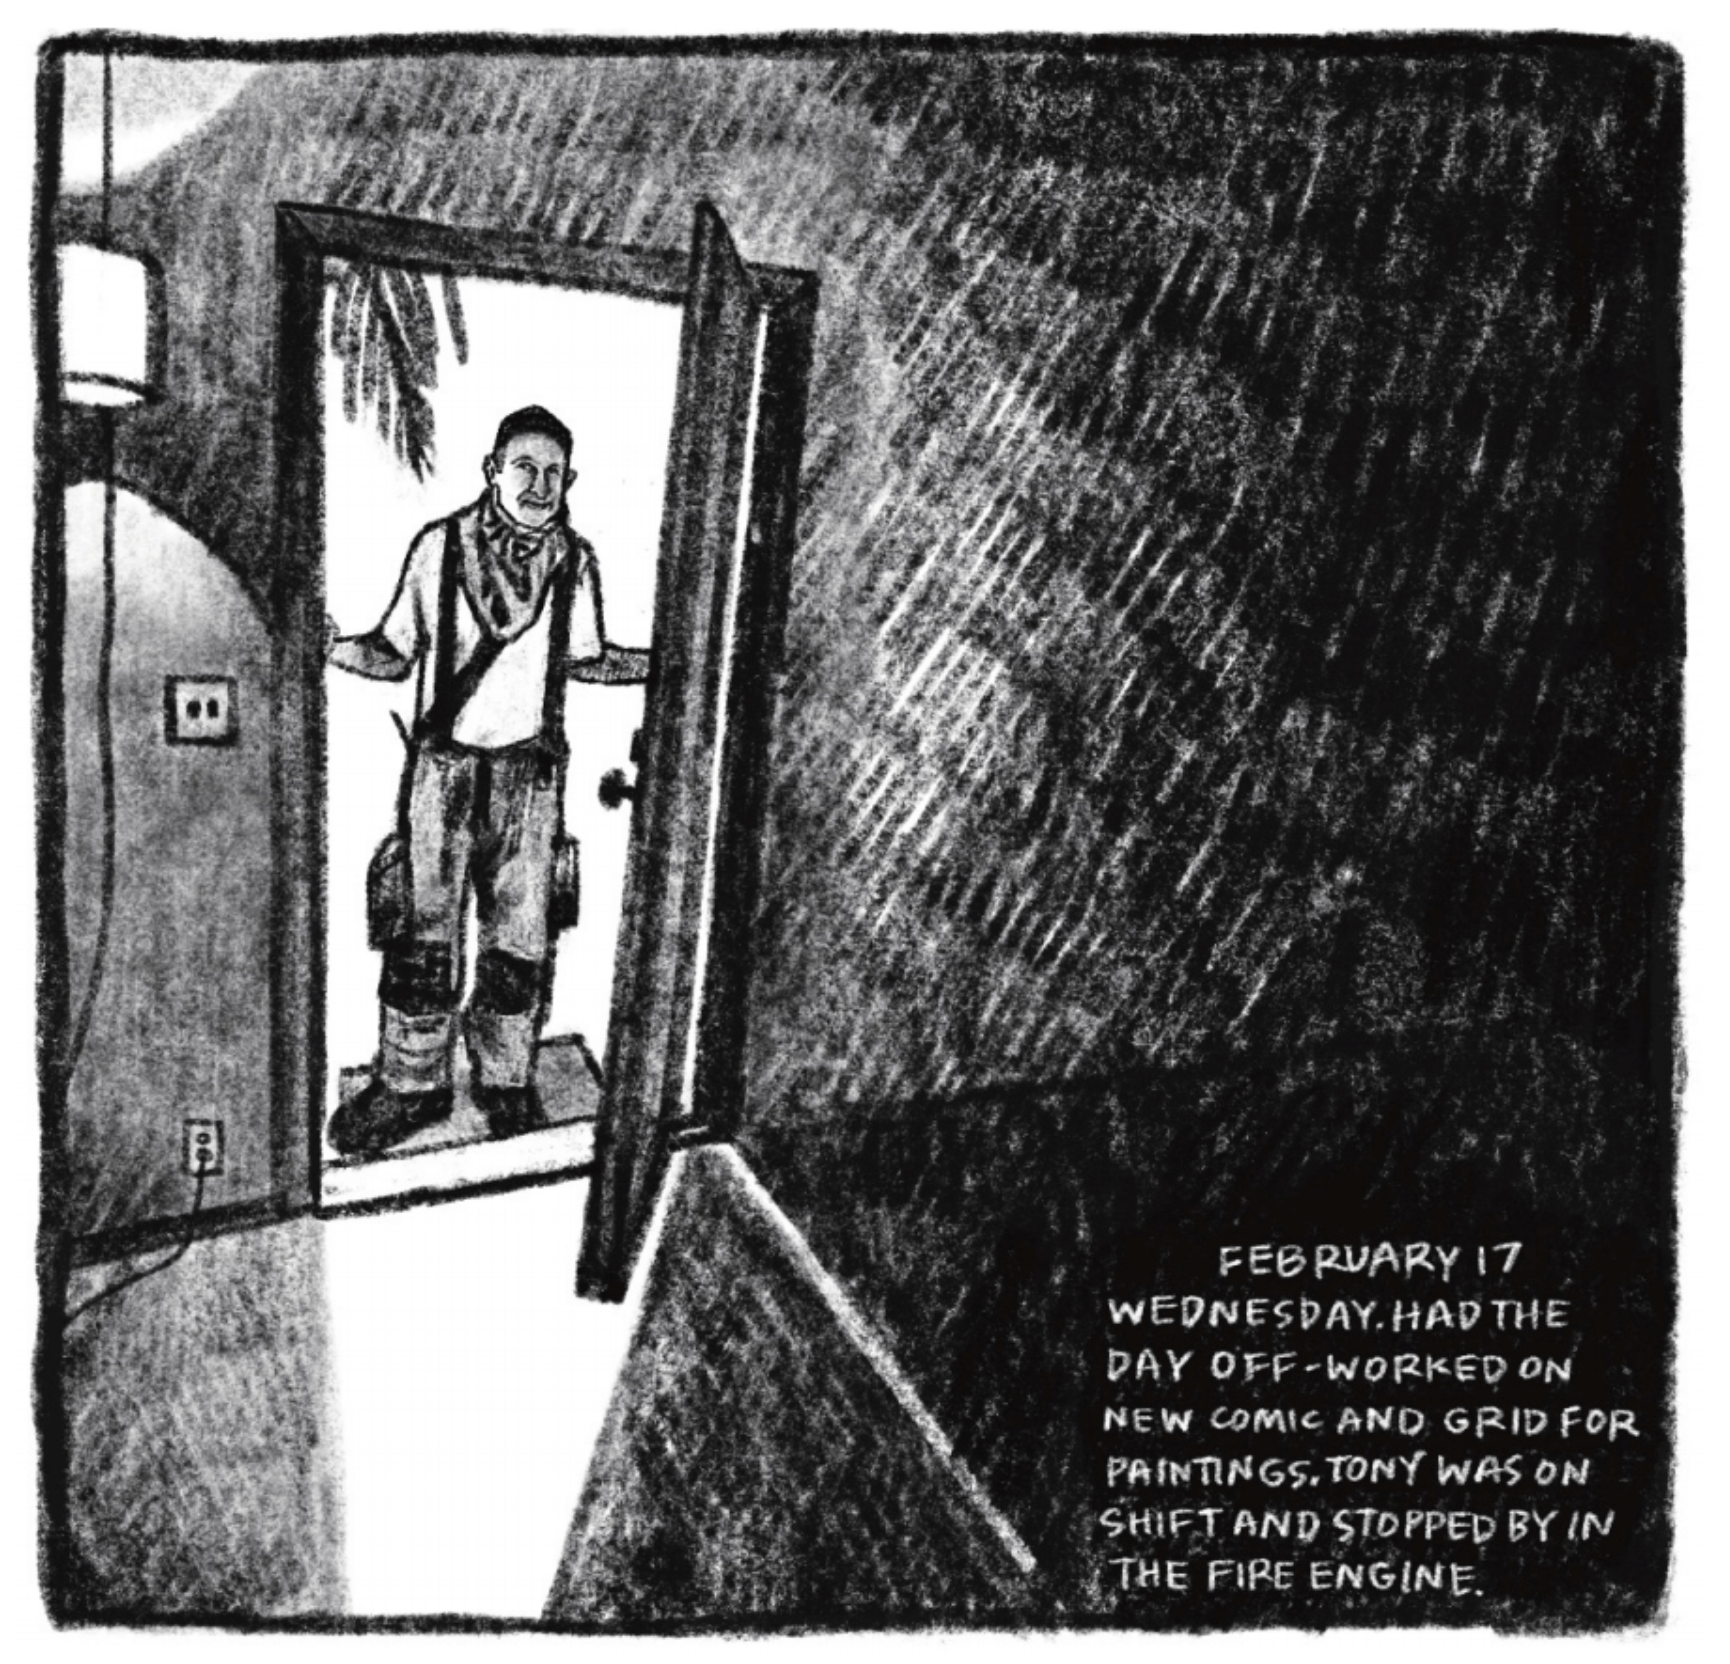 Hold Still Episode 9, Panel 1
Drawing of a man in a firefighter's uniform standing in a doorway, with lots of hatching. 
Reads in lower left corner: "FEBRUARY 17
WEDNESDAY. HAD THE DAY OFF - WORKED ON NEW COMIC AND GRID FOR PAINTINGS. TONY WAS ON SHIFT AND STOPPED BY IN THE FIRE ENGINE."